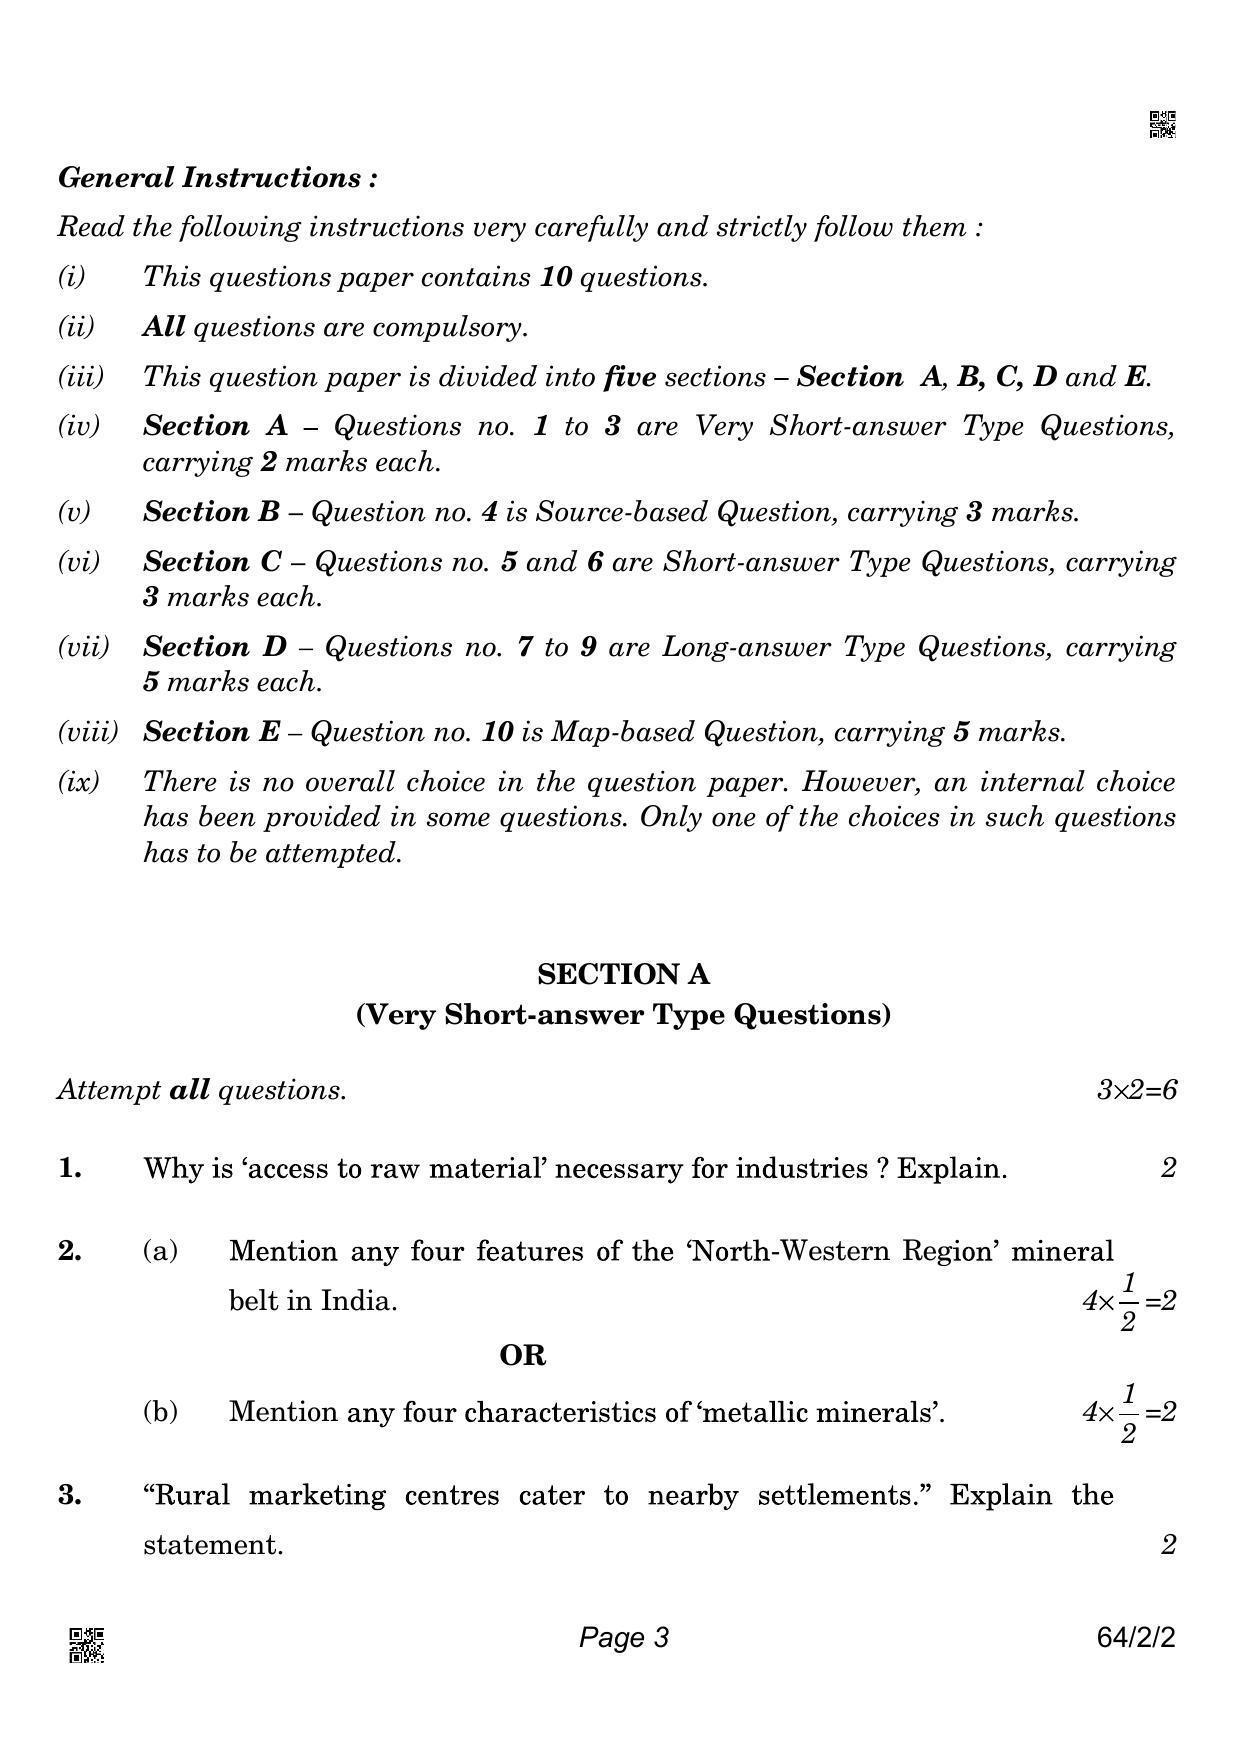 CBSE Class 12 64-2-2 Geography 2022 Question Paper - Page 3